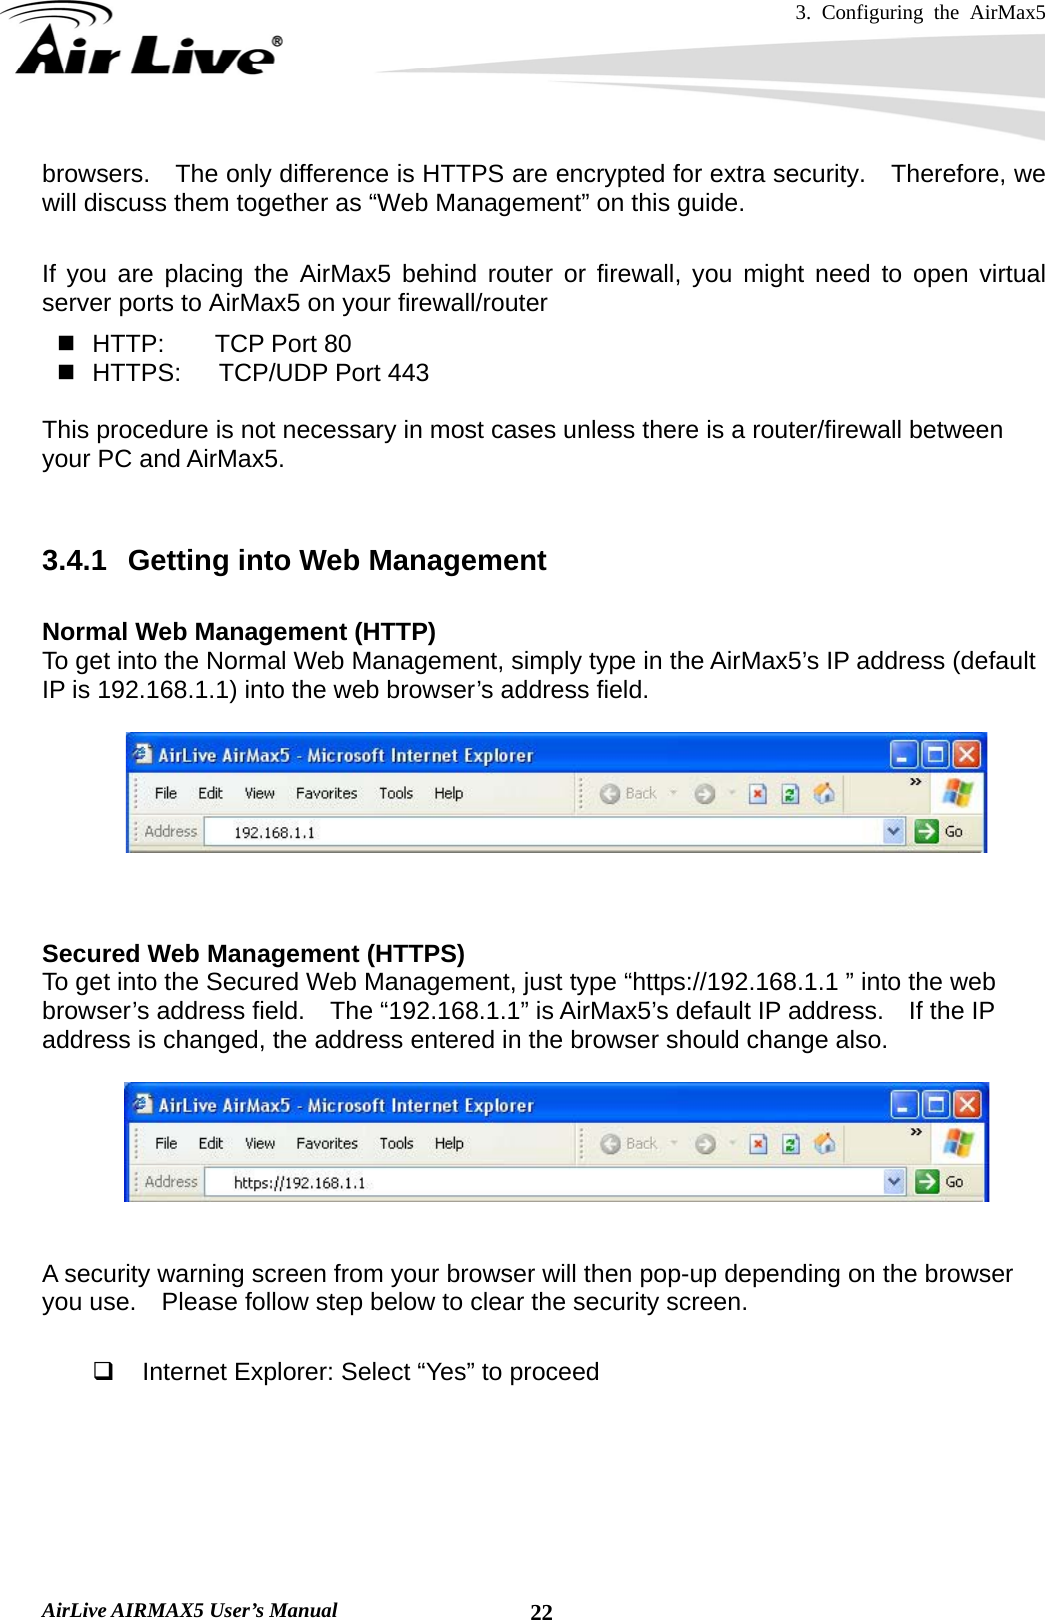 3. Configuring the AirMax5   AirLive AIRMAX5 User’s Manual  22browsers.    The only difference is HTTPS are encrypted for extra security.    Therefore, we will discuss them together as “Web Management” on this guide.  If you are placing the AirMax5 behind router or firewall, you might need to open virtual server ports to AirMax5 on your firewall/router   HTTP:    TCP Port 80   HTTPS:   TCP/UDP Port 443  This procedure is not necessary in most cases unless there is a router/firewall between your PC and AirMax5.   3.4.1  Getting into Web Management  Normal Web Management (HTTP) To get into the Normal Web Management, simply type in the AirMax5’s IP address (default IP is 192.168.1.1) into the web browser’s address field.          Secured Web Management (HTTPS) To get into the Secured Web Management, just type “https://192.168.1.1 ” into the web browser’s address field.    The “192.168.1.1” is AirMax5’s default IP address.    If the IP address is changed, the address entered in the browser should change also.     A security warning screen from your browser will then pop-up depending on the browser you use.    Please follow step below to clear the security screen.    Internet Explorer: Select “Yes” to proceed 